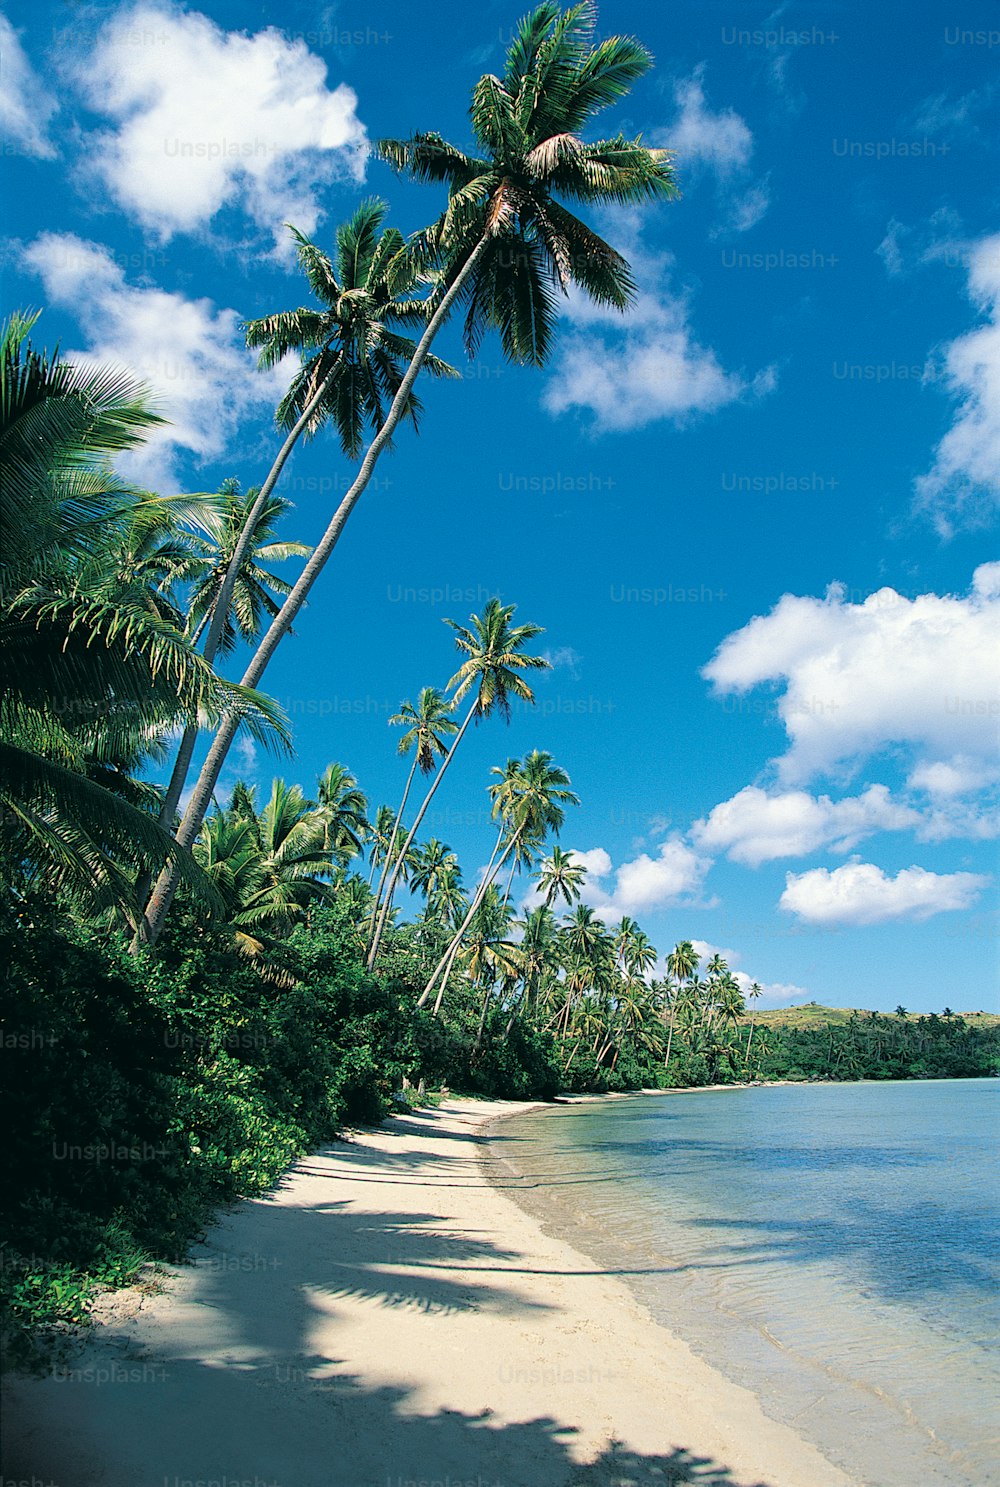 a sandy beach with palm trees and water